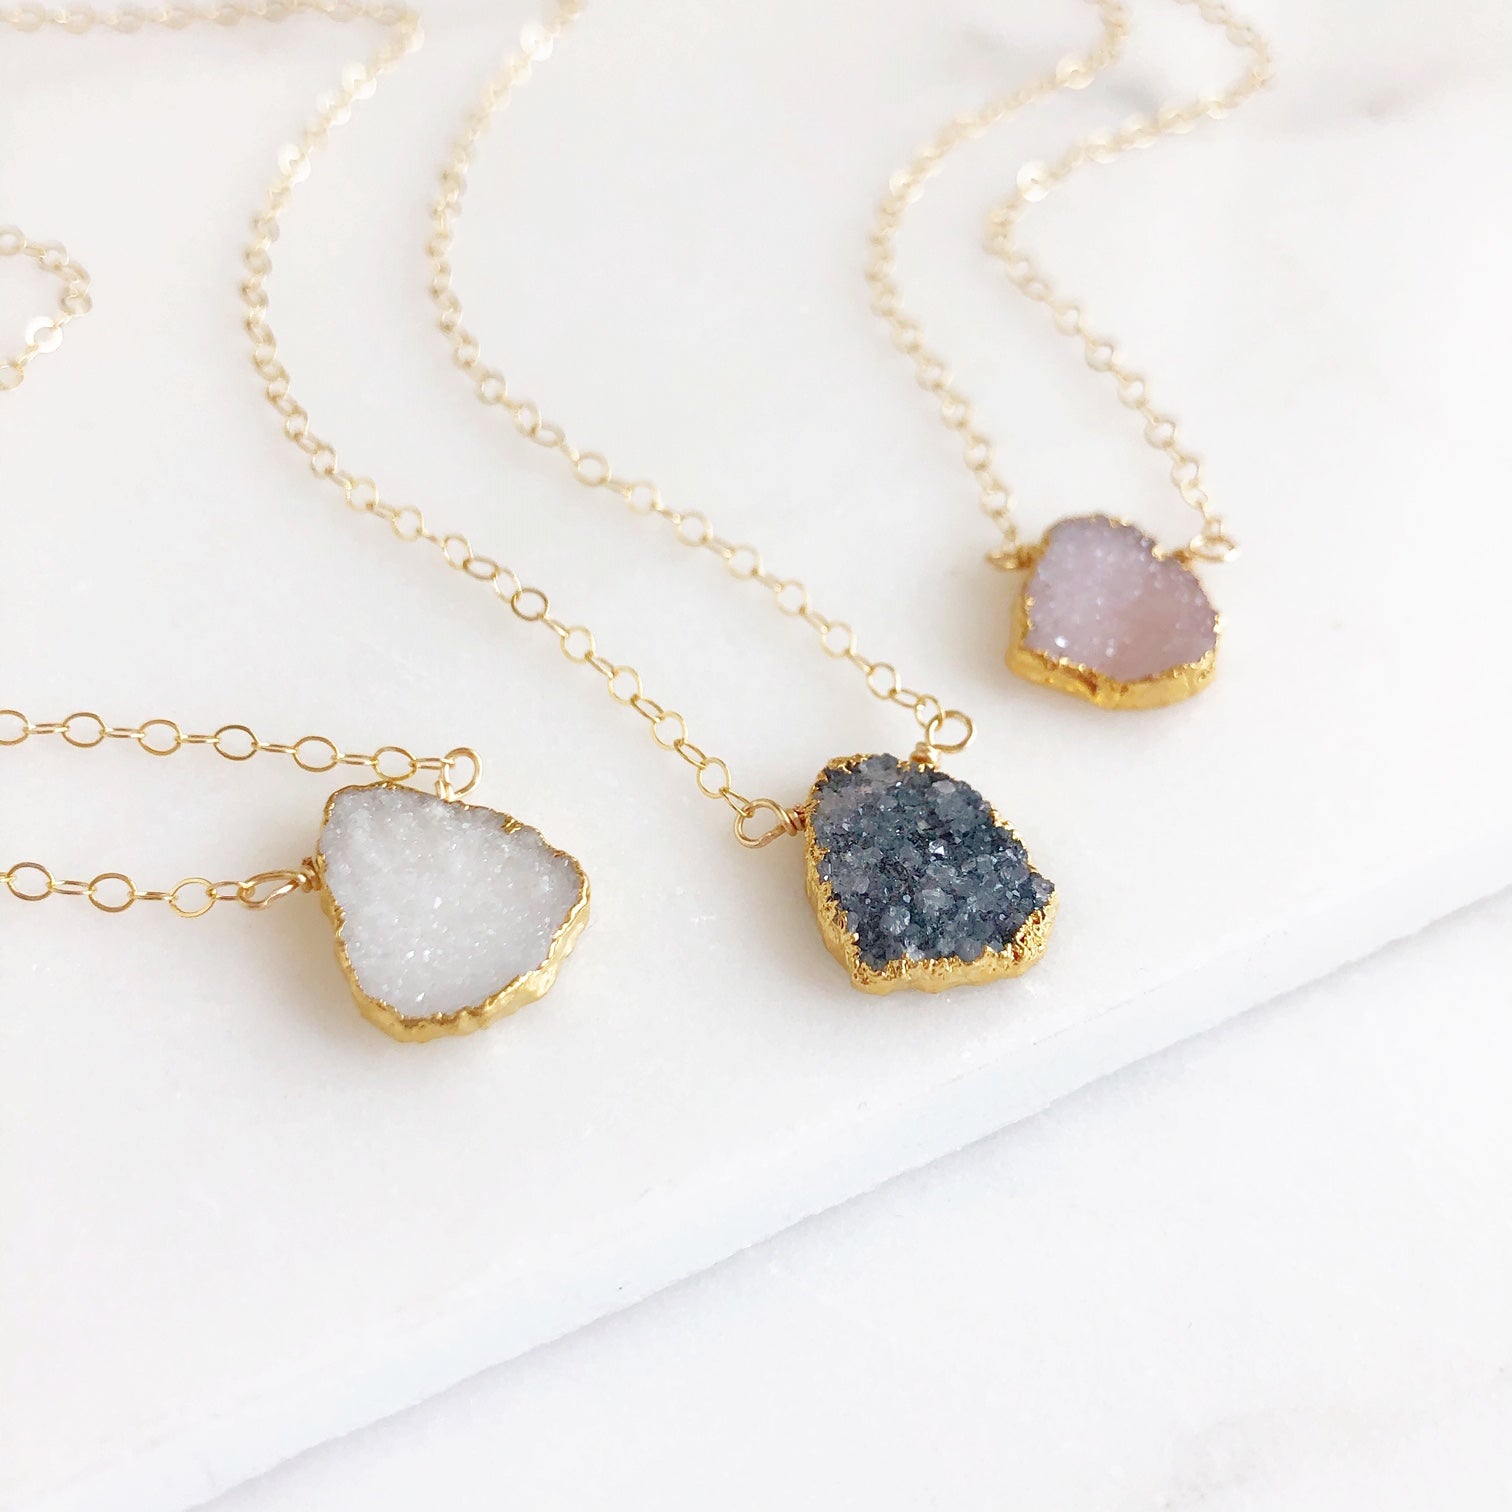 Natural stone and druzy stone necklace set with tika and earrings | Silver  jewelry fashion, Druzy stone necklace, Stone necklace set